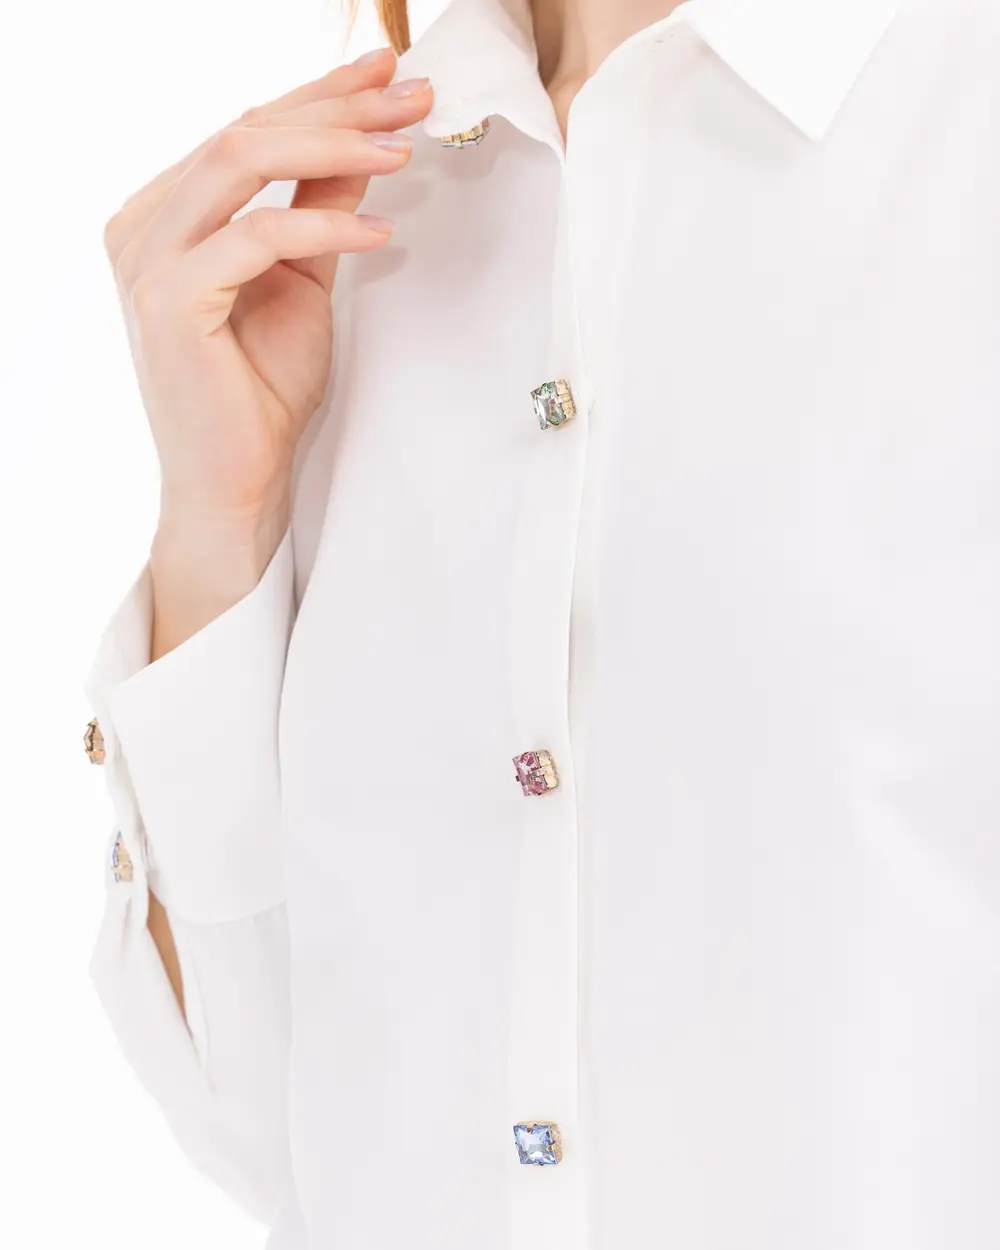 Classic Cut Shirt with Snap Buttons